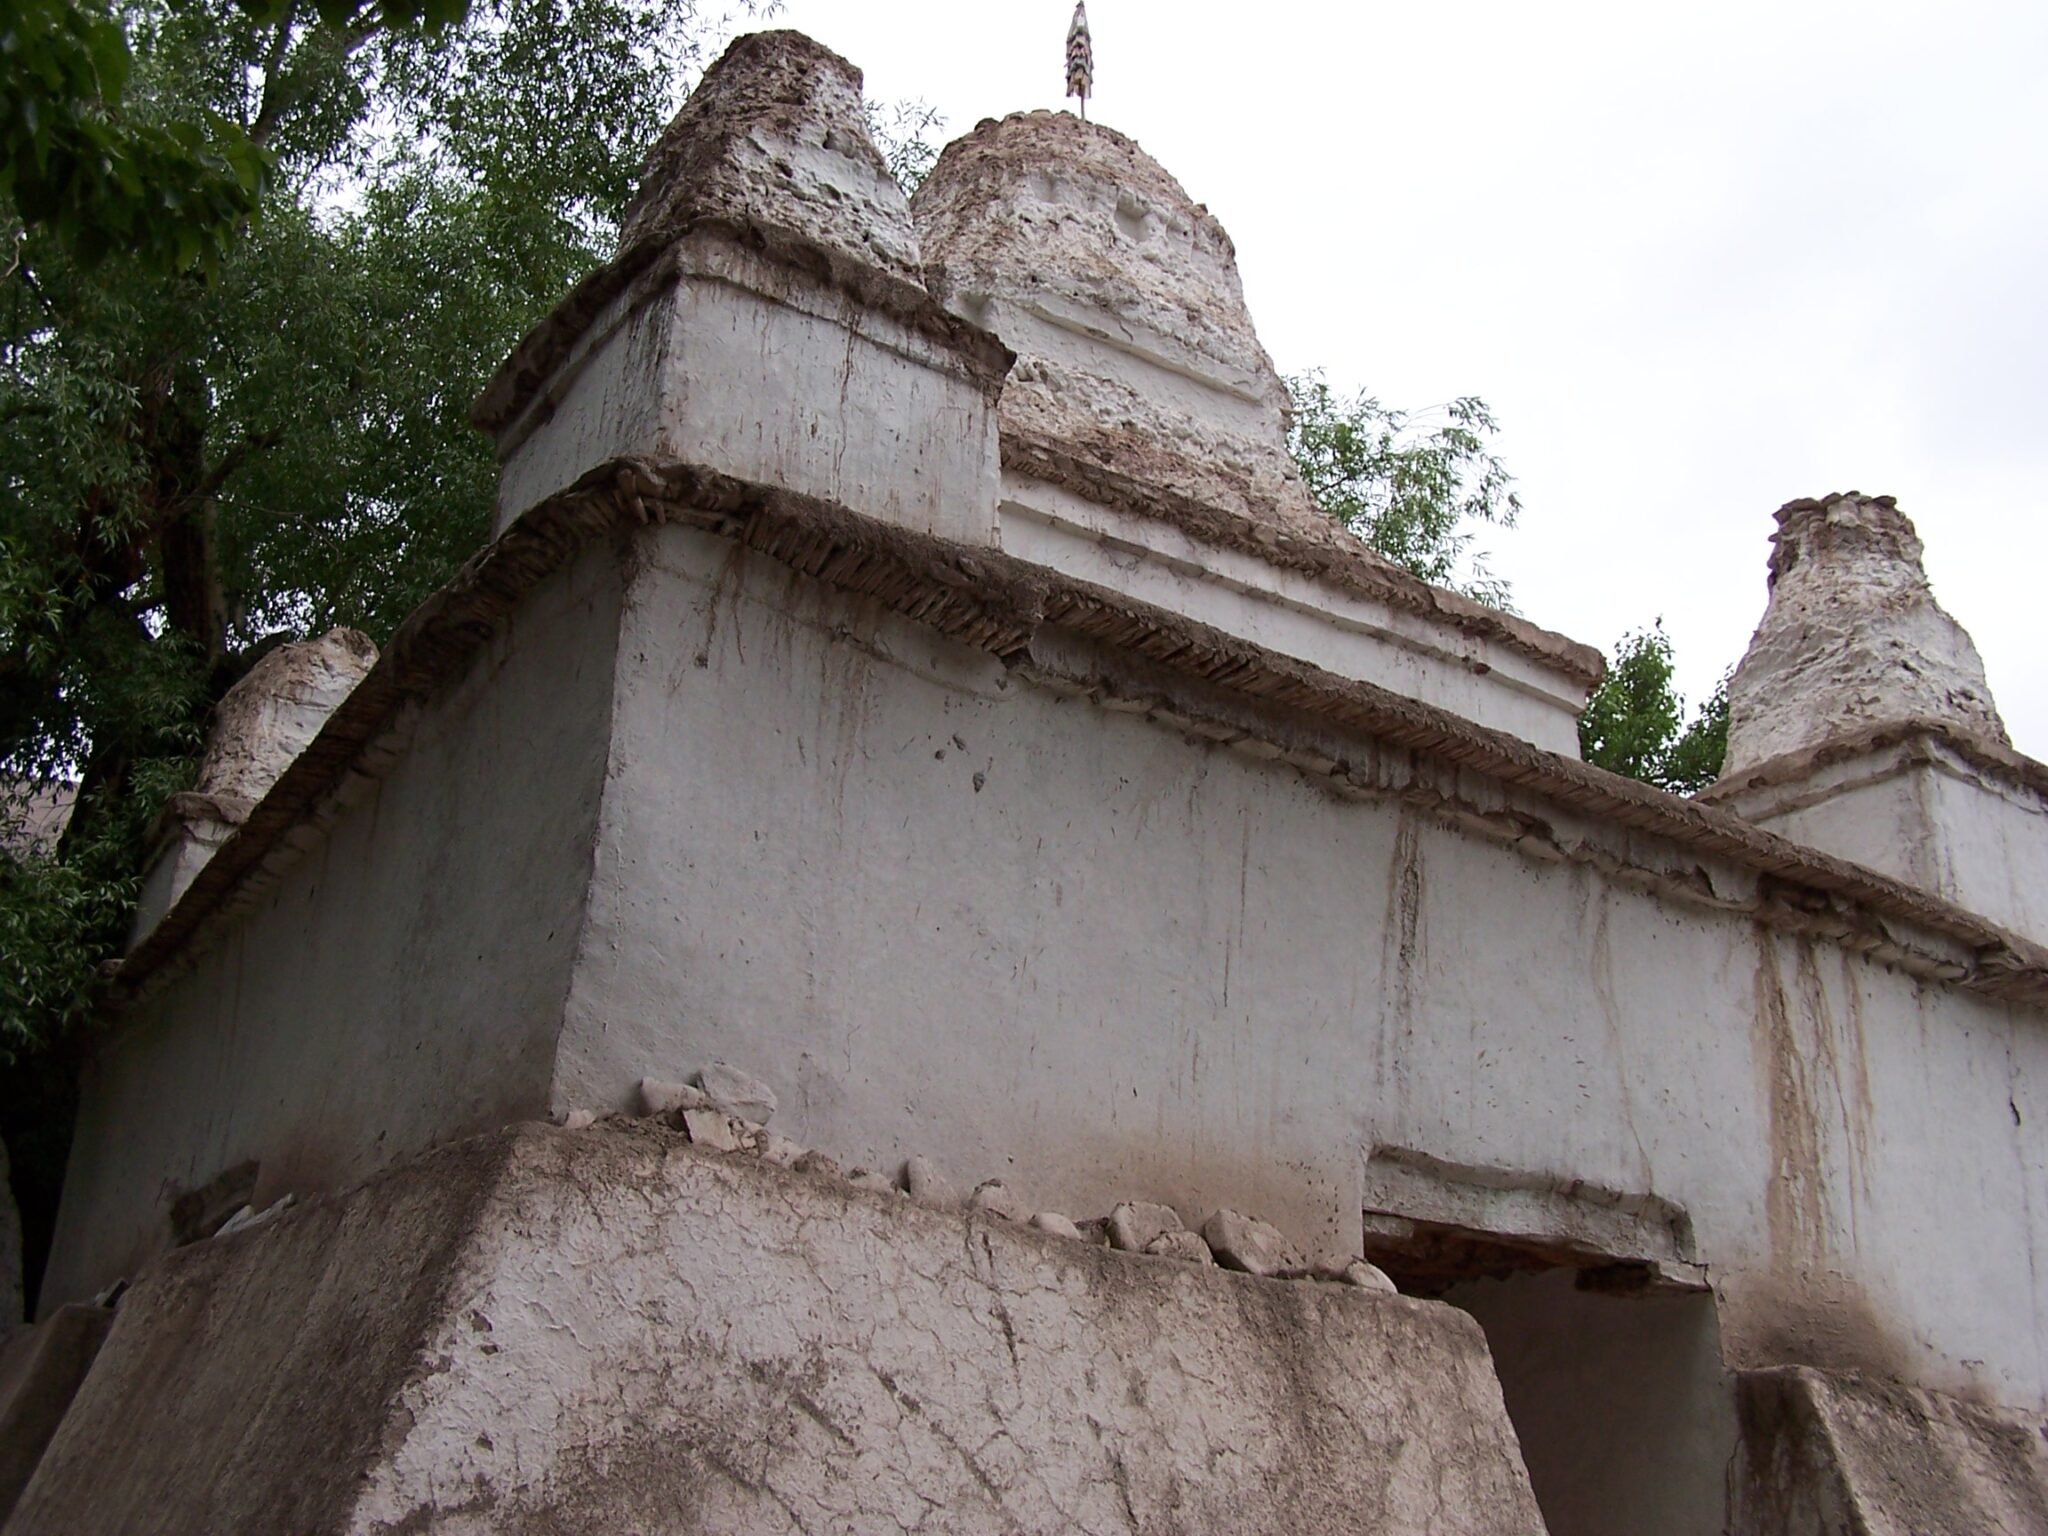 Close view from below of white stupa on square base with eroded, crumbling towers